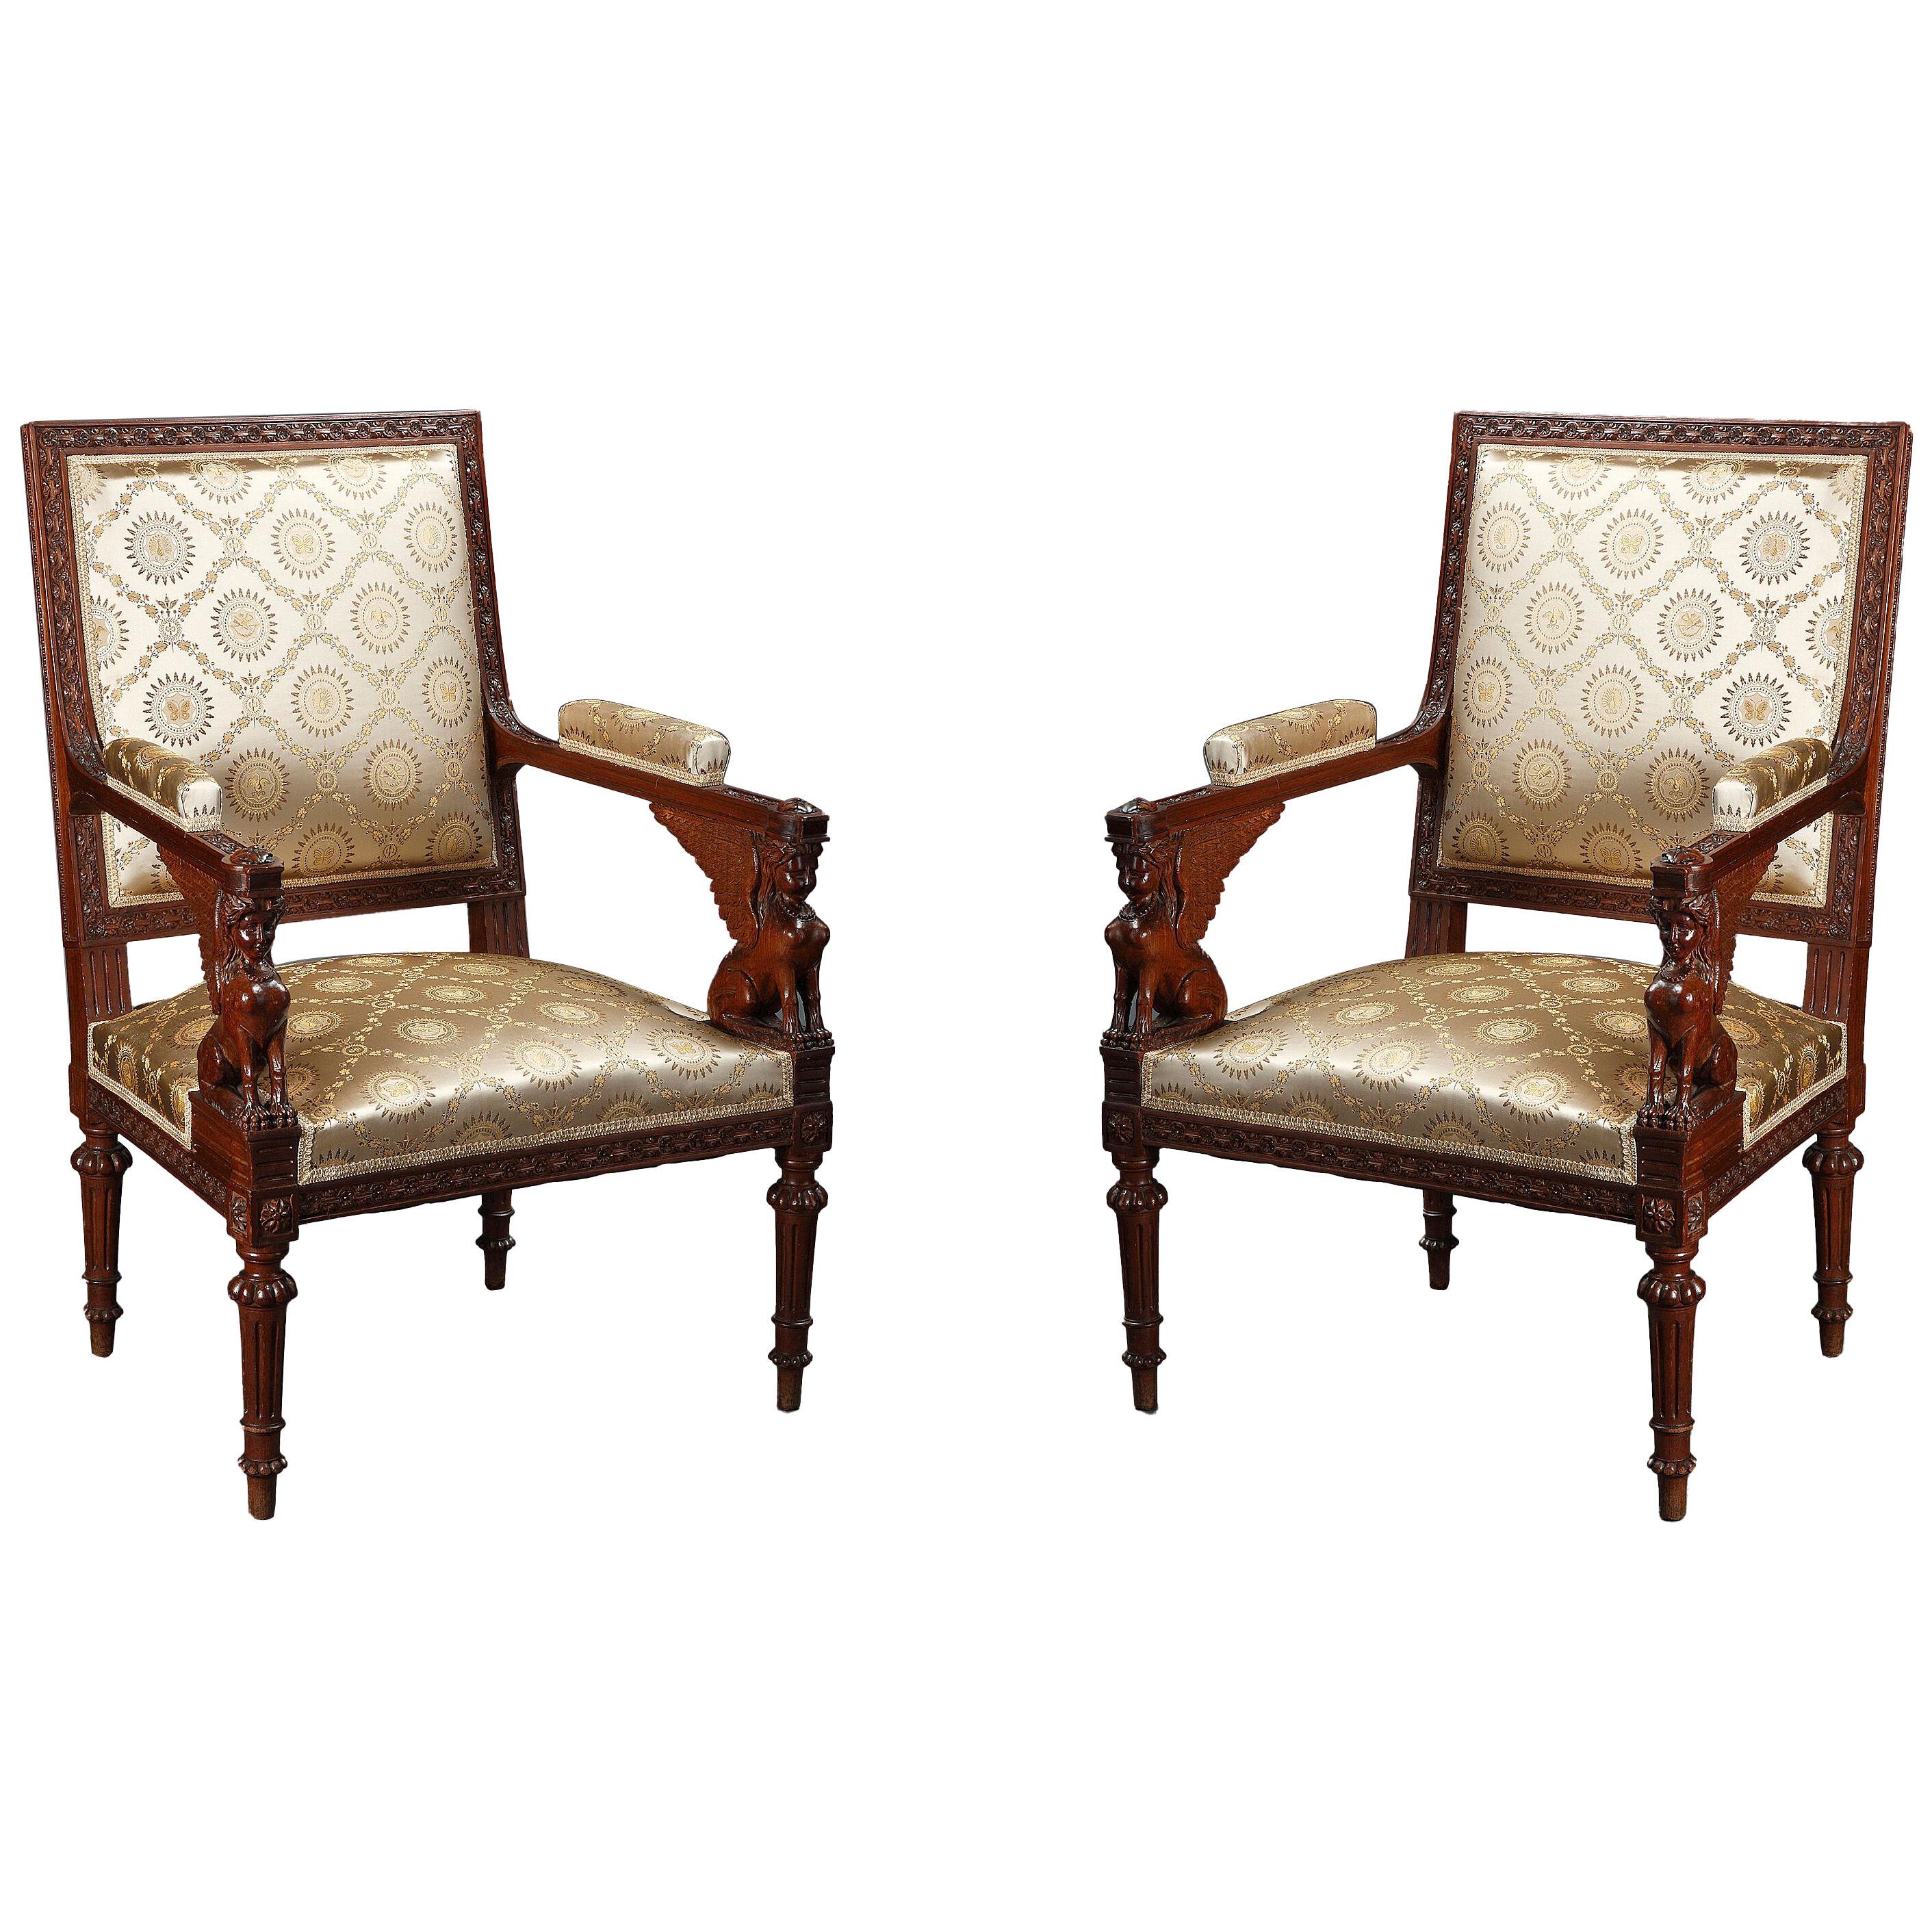 Elegant Pair of Directoire Style Armchairs after G. Jacob, France, Circa 1870